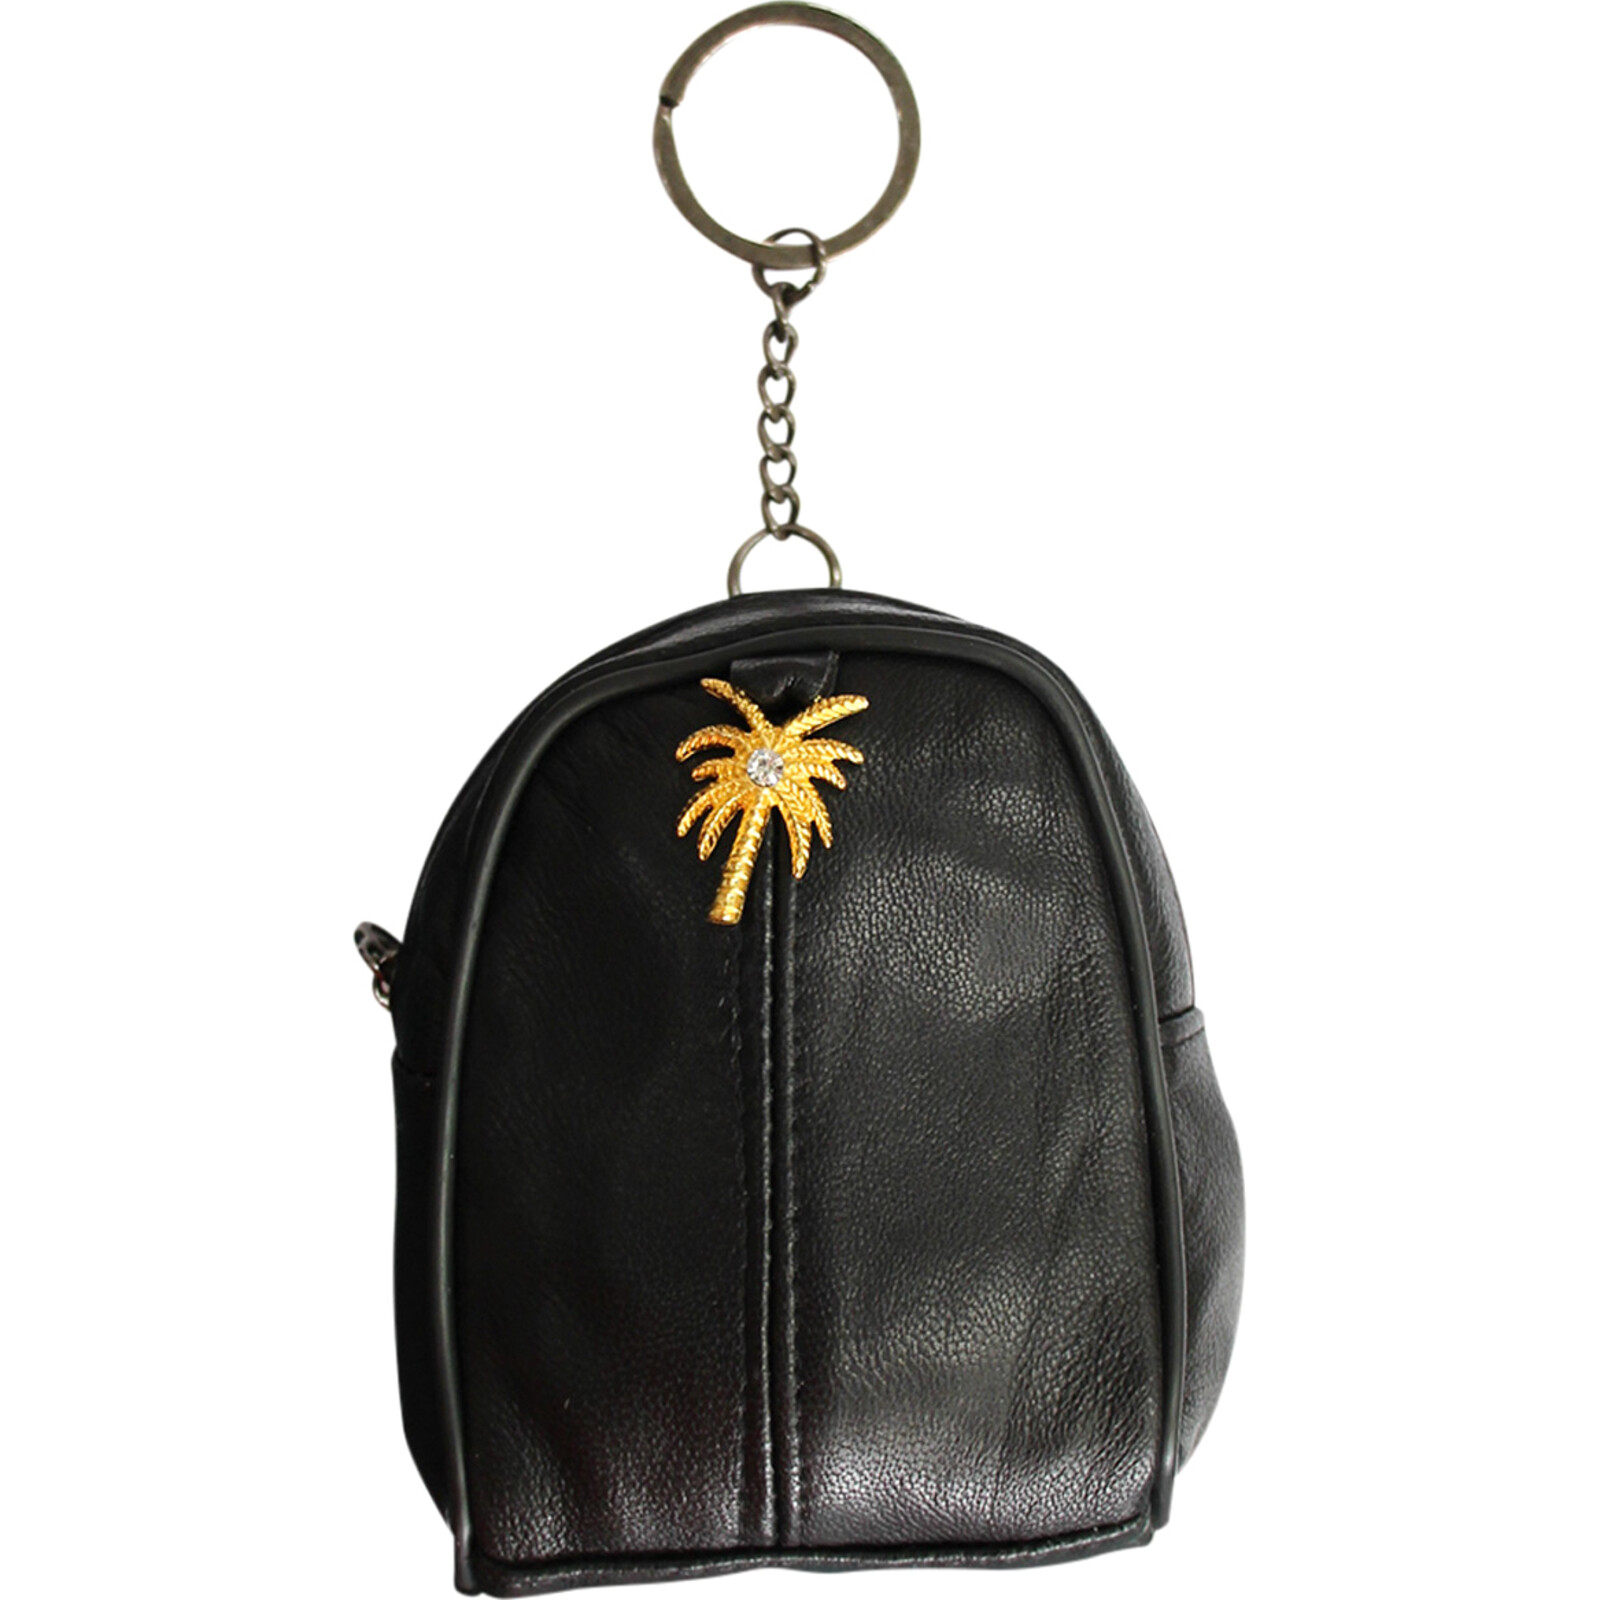 Reusable Shopping Bag Kit in Leather Palm Purse Black